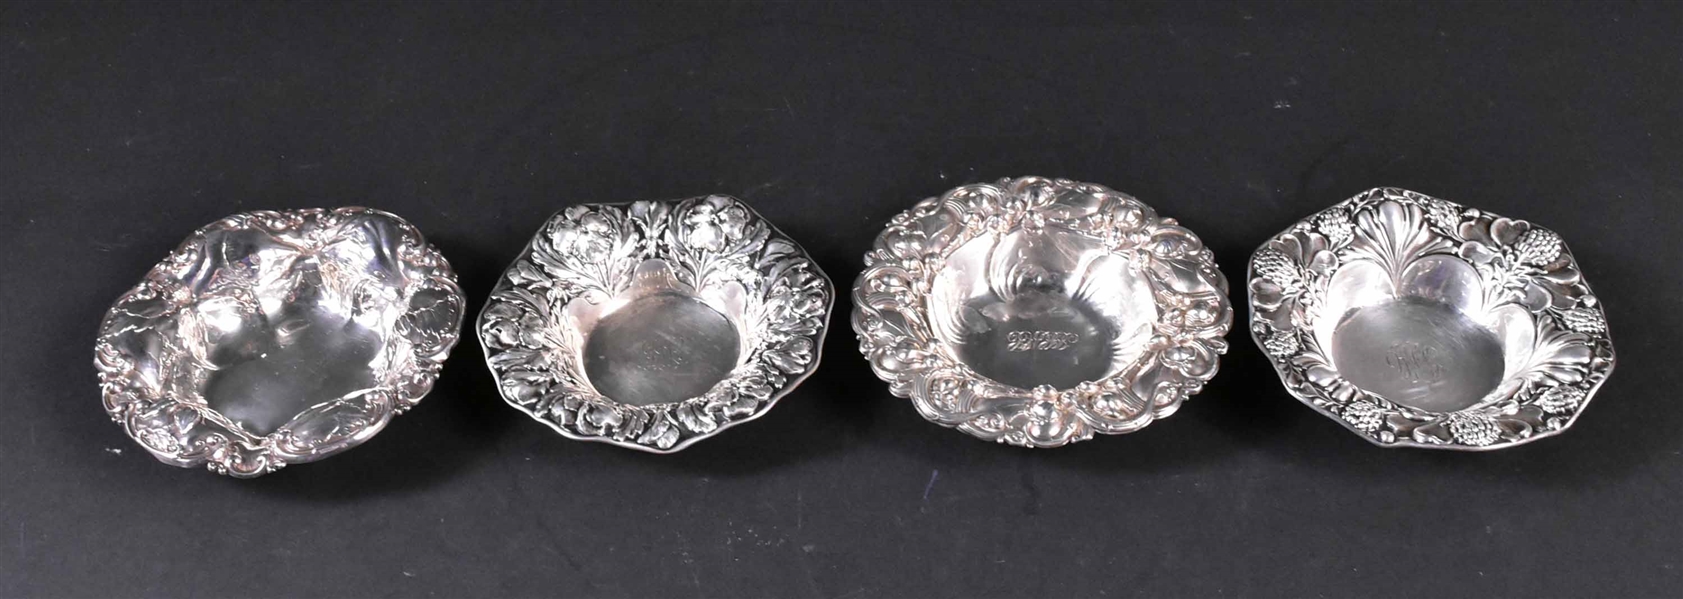 Four American Sterling Silver Bonbon Dishes